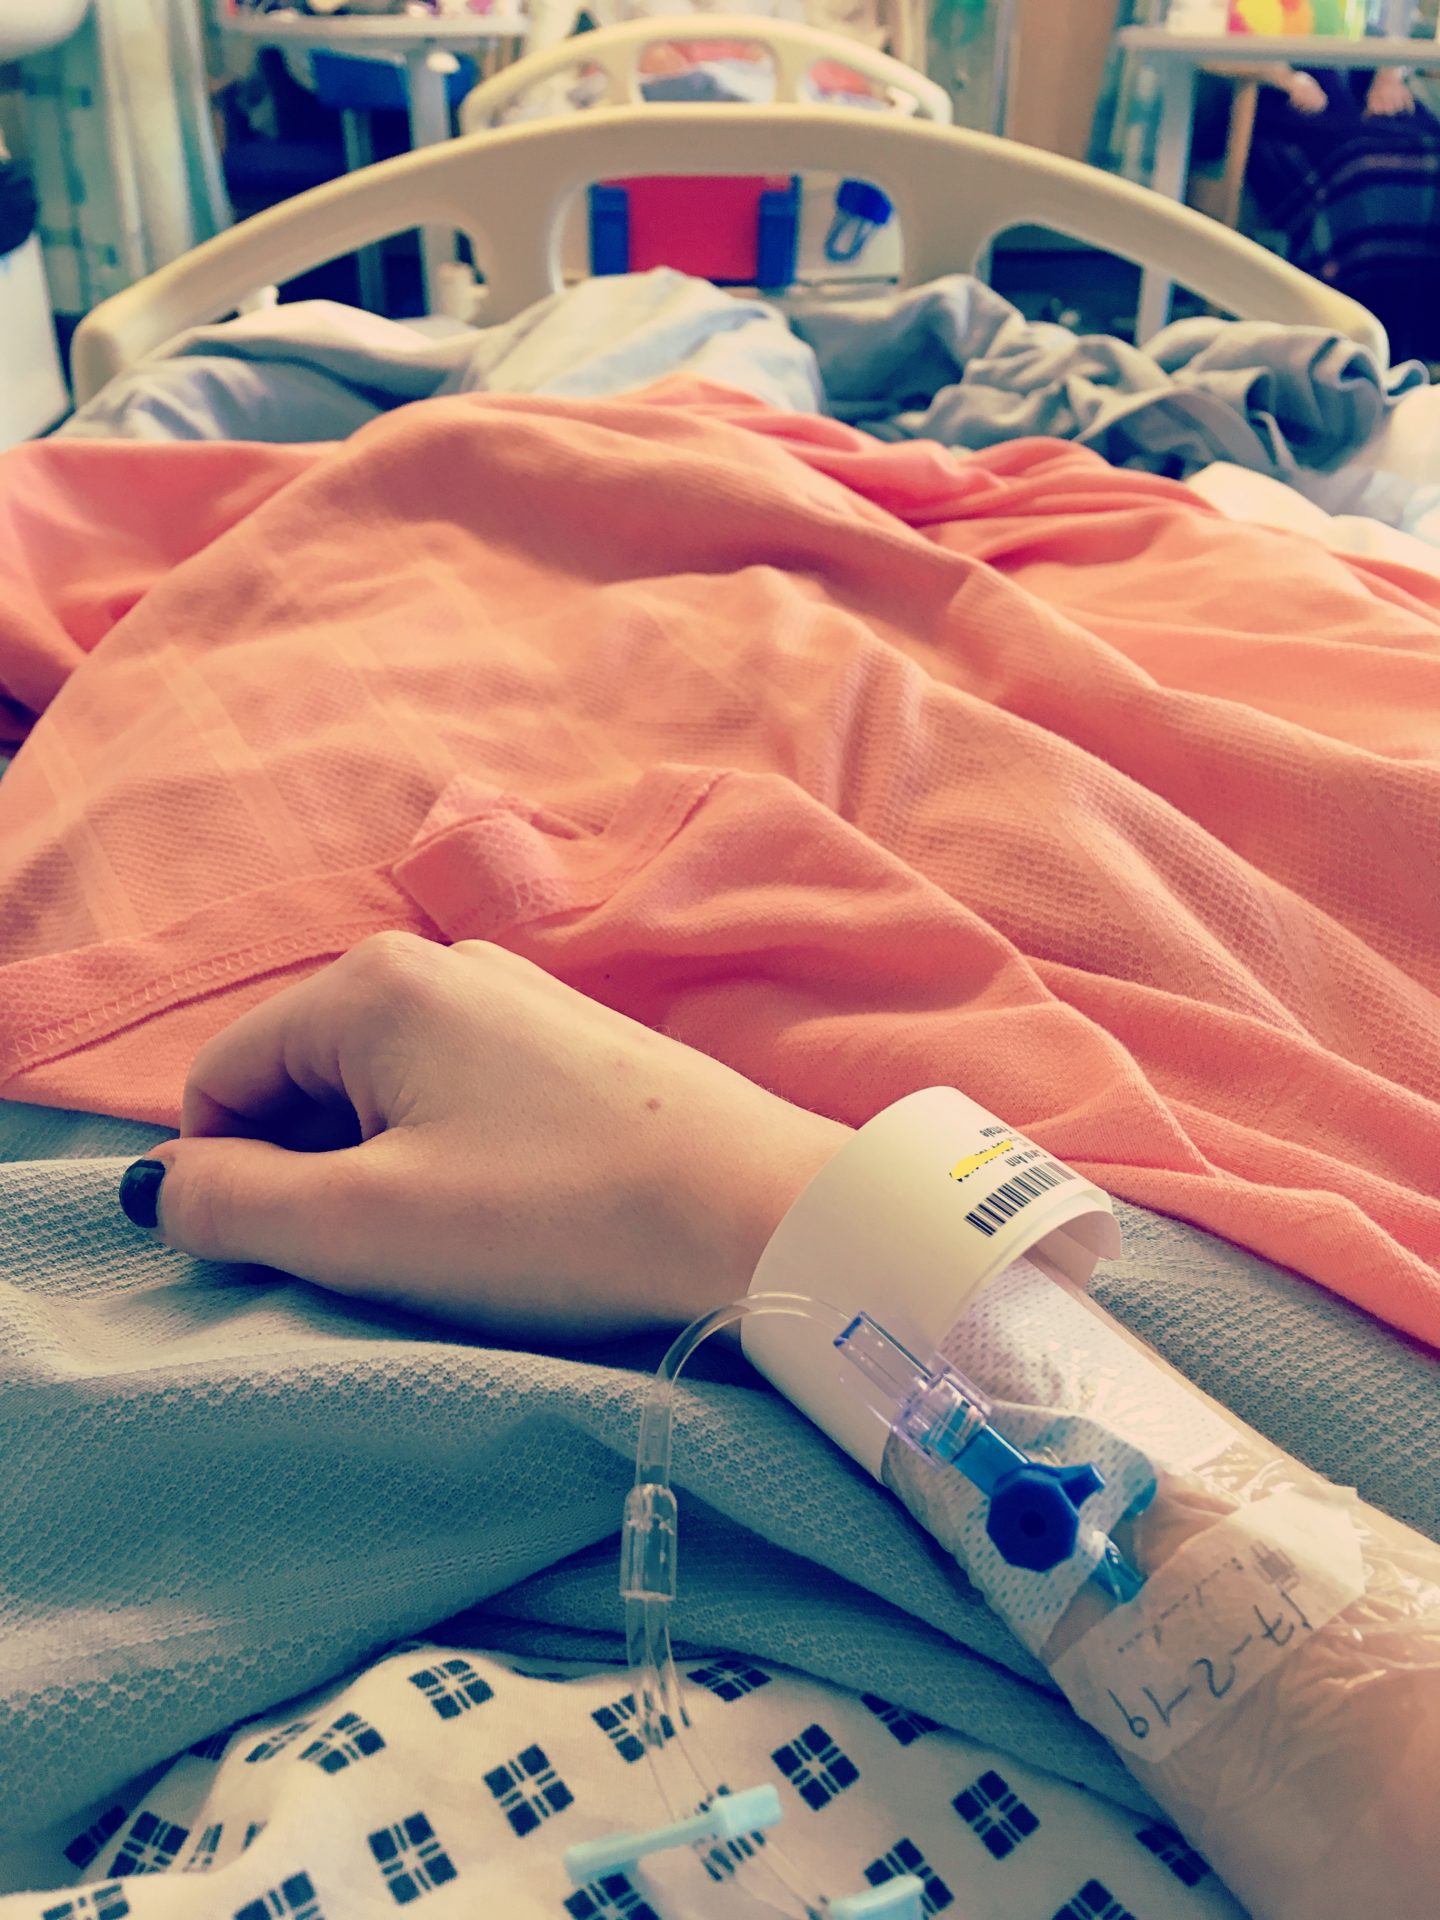 An image of me in a hospital bed covered in blankets. I took it looking down so you can see my arm with the IV and legs.